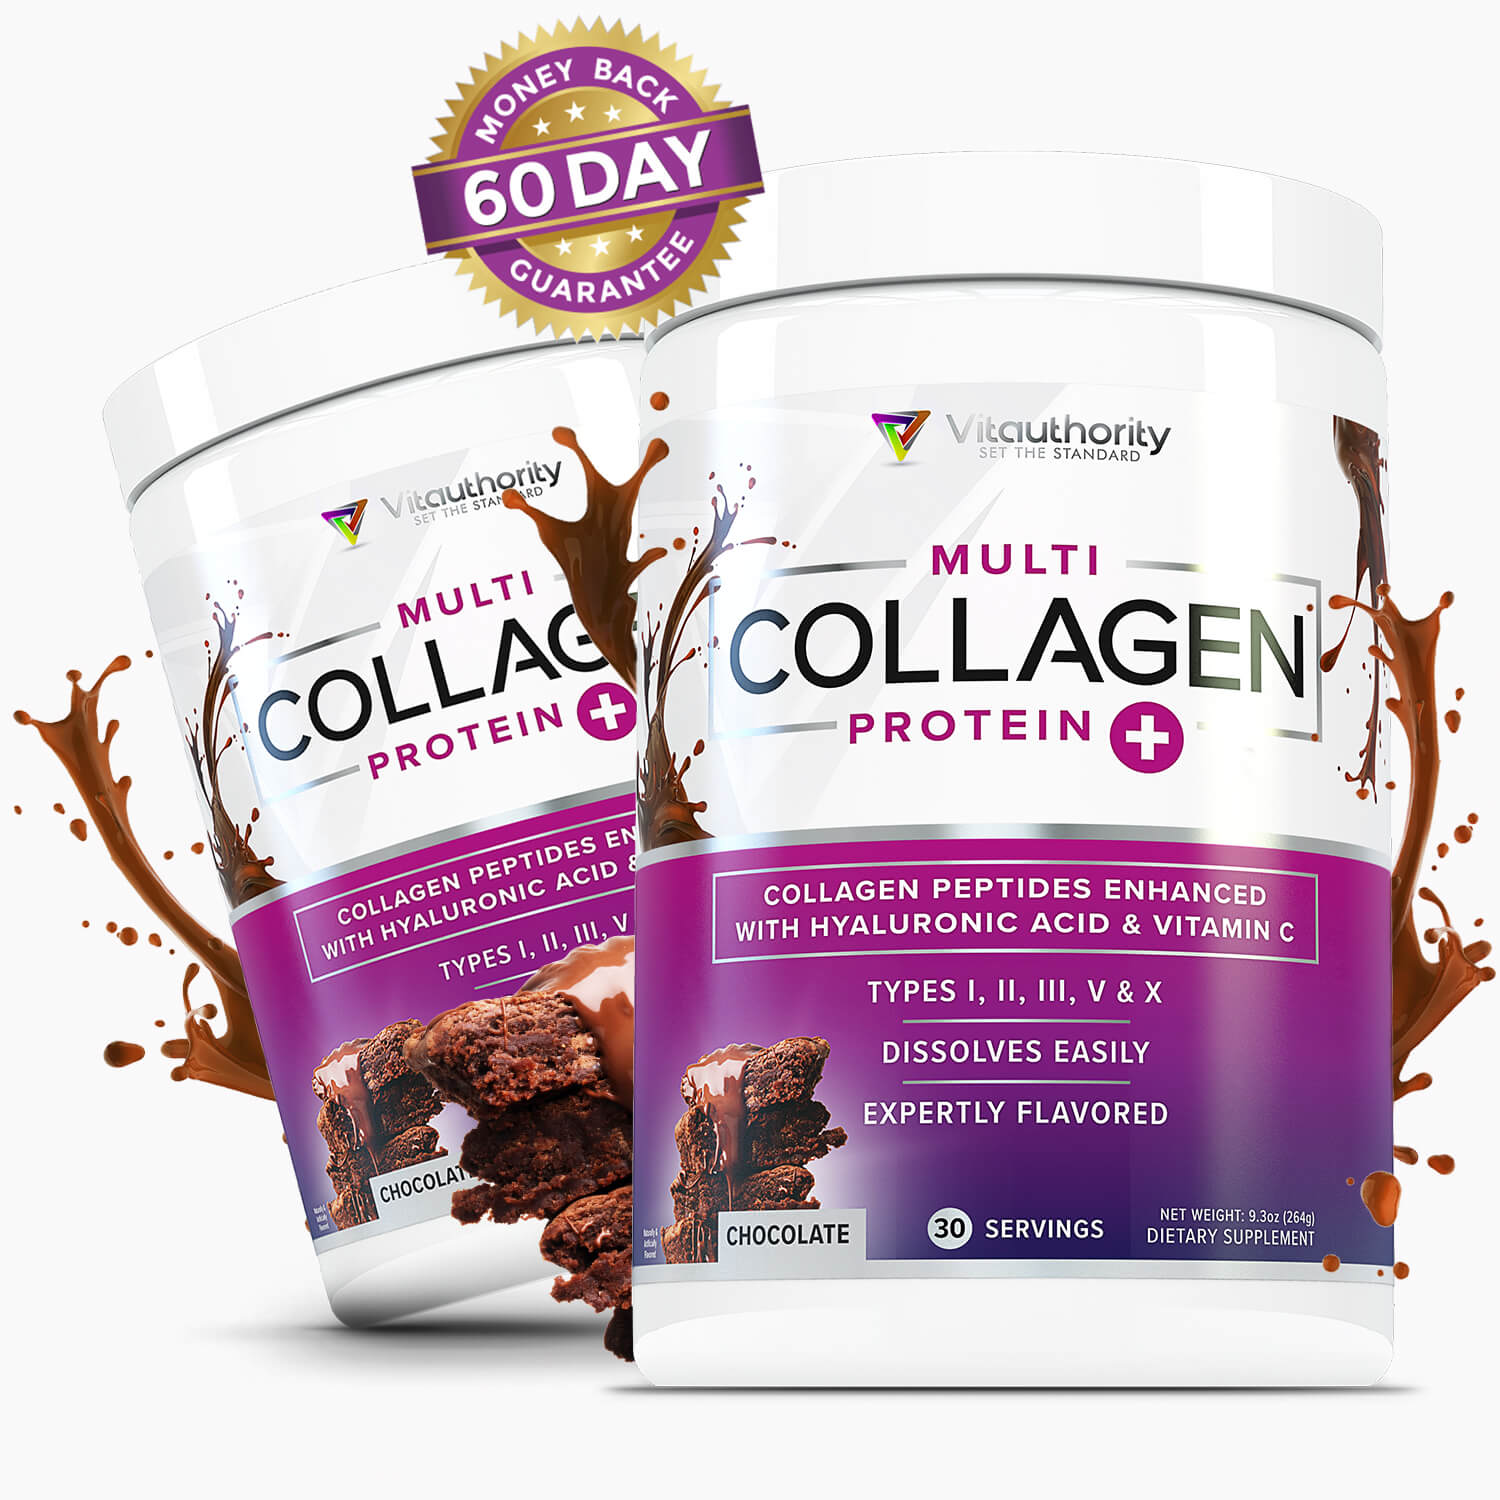 2 Bottles of Multi Collagen Peptides - Chocolate